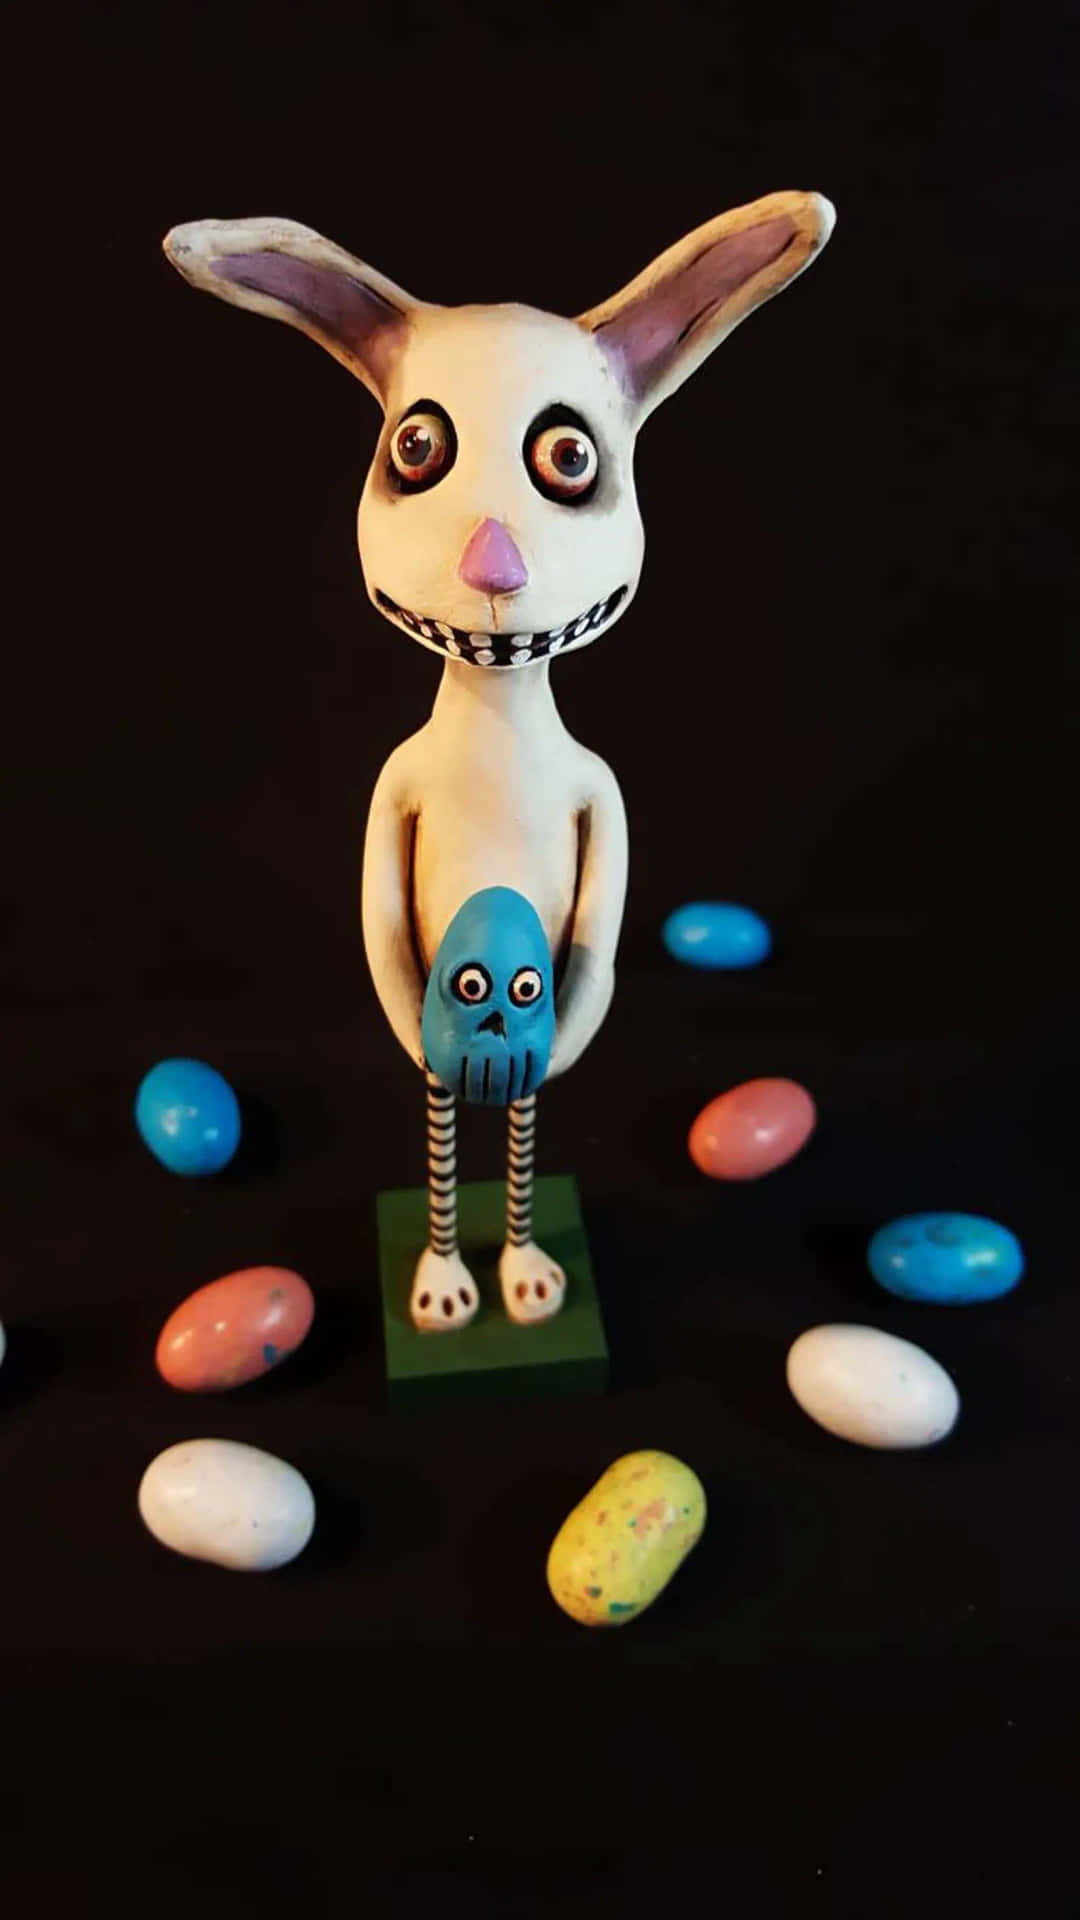 A Bunny Figurine With Candy In His Hands